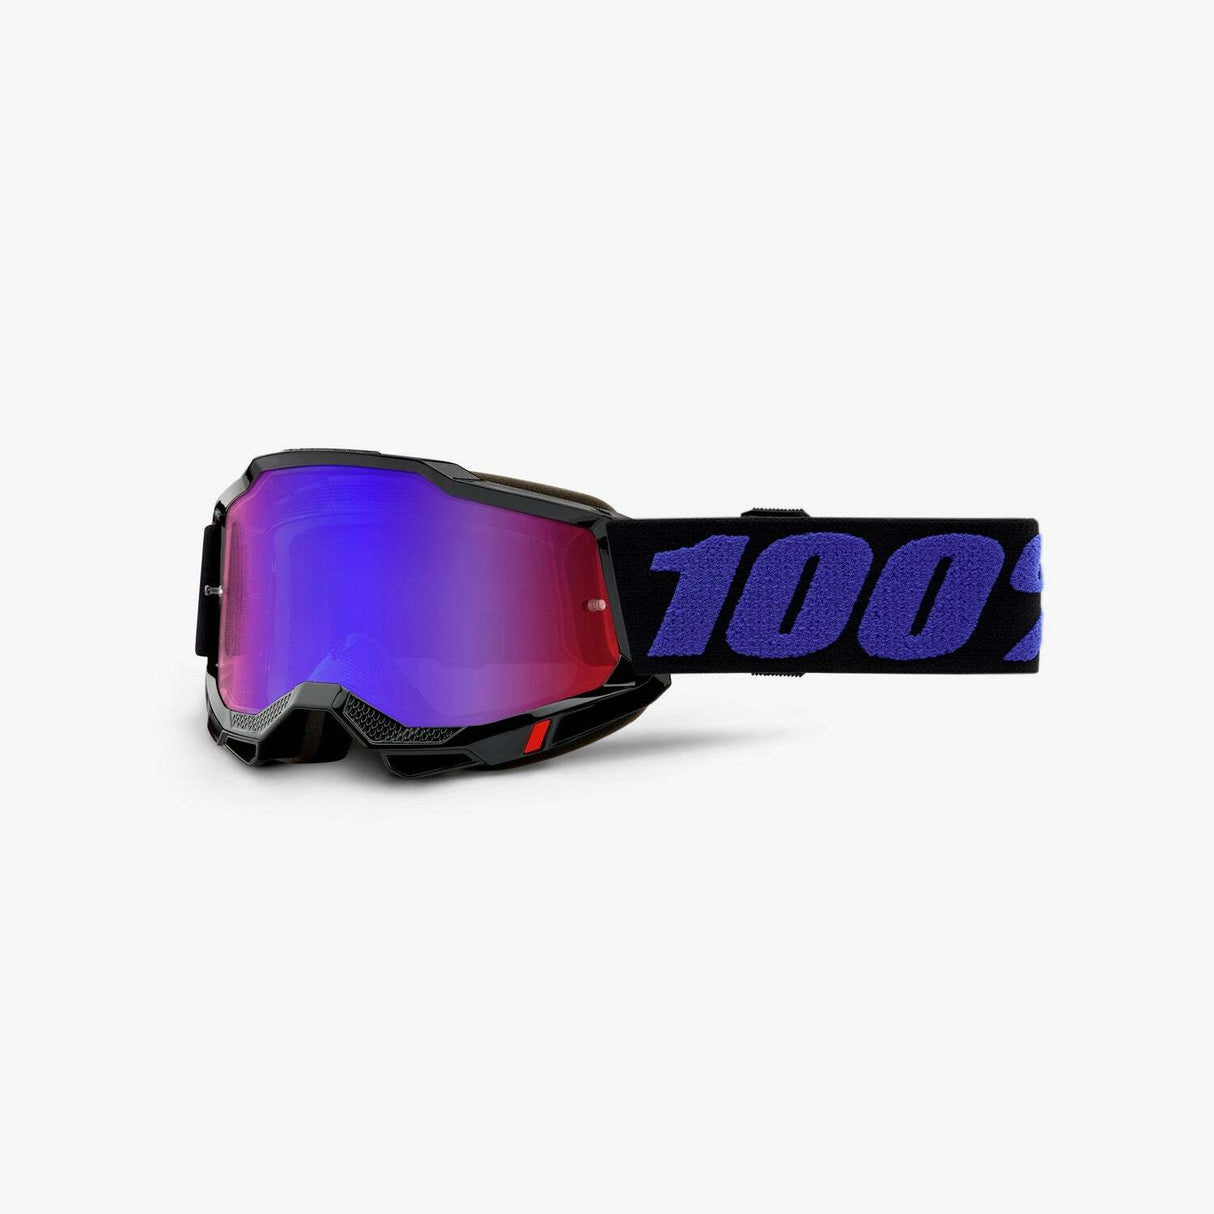 100 Percent Accuri 2 Goggle Mirror Red/Blue Lens - Unboxed